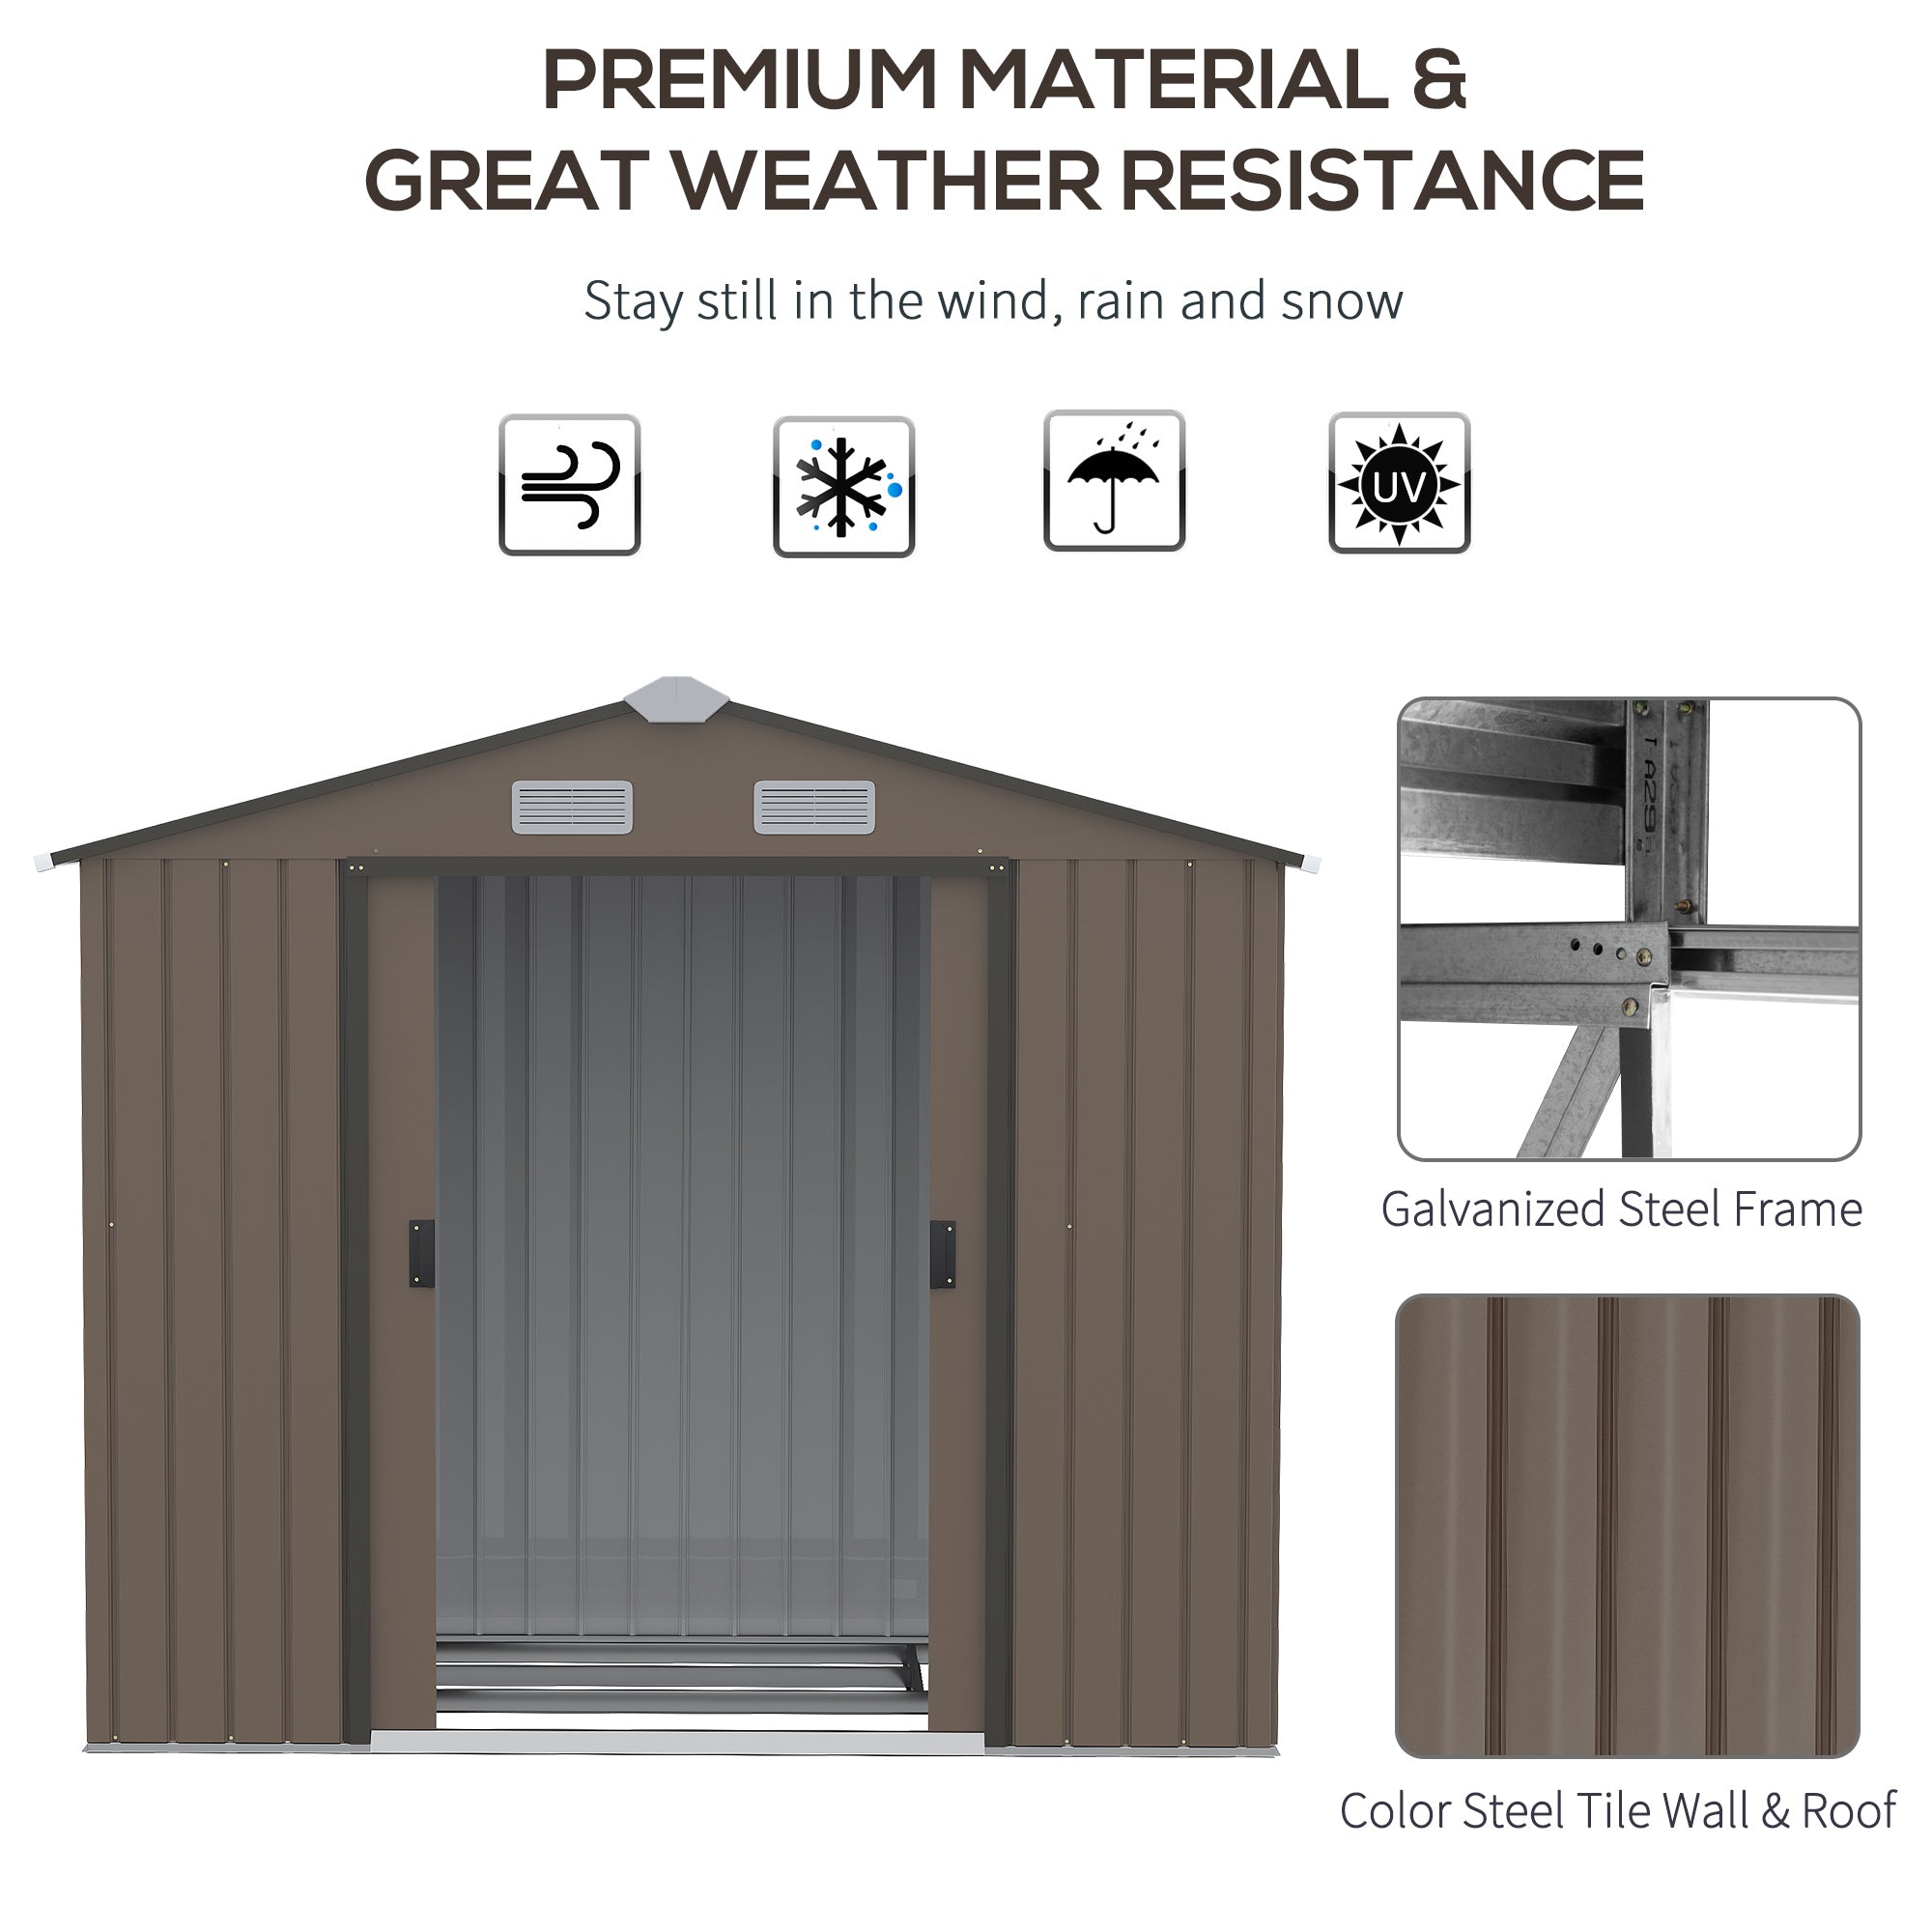 Outsunny 7ft x 4ft Lockable Garden Metal Storage Shed Large Patio Roofed Tool Storage Building Foundation Sheds Box Outdoor Furniture, Brown